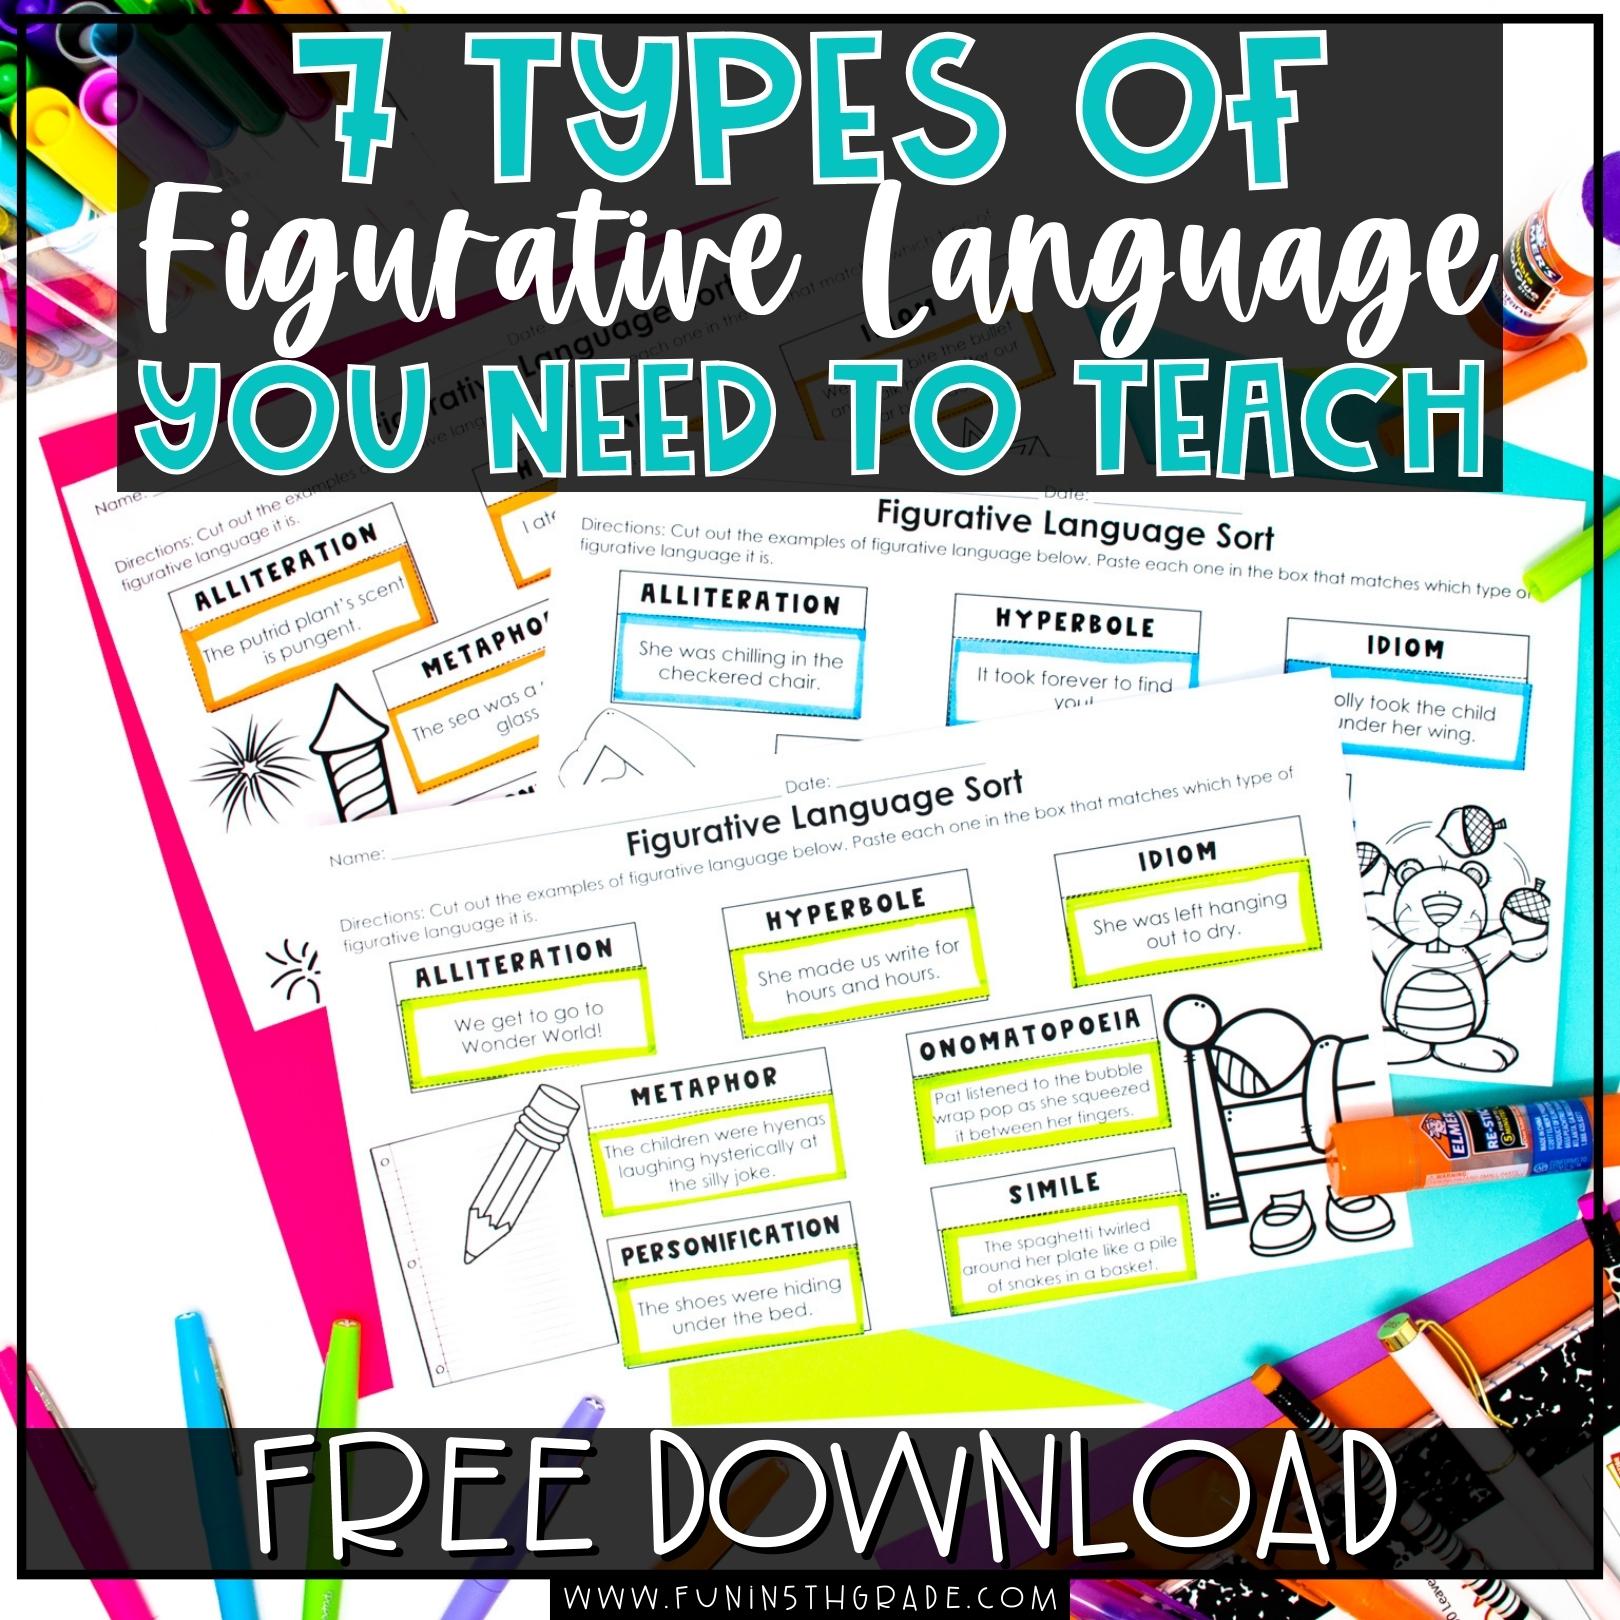 7 Types of Figurative Language you Need to Teach in Upper Elementary (Blog Post)